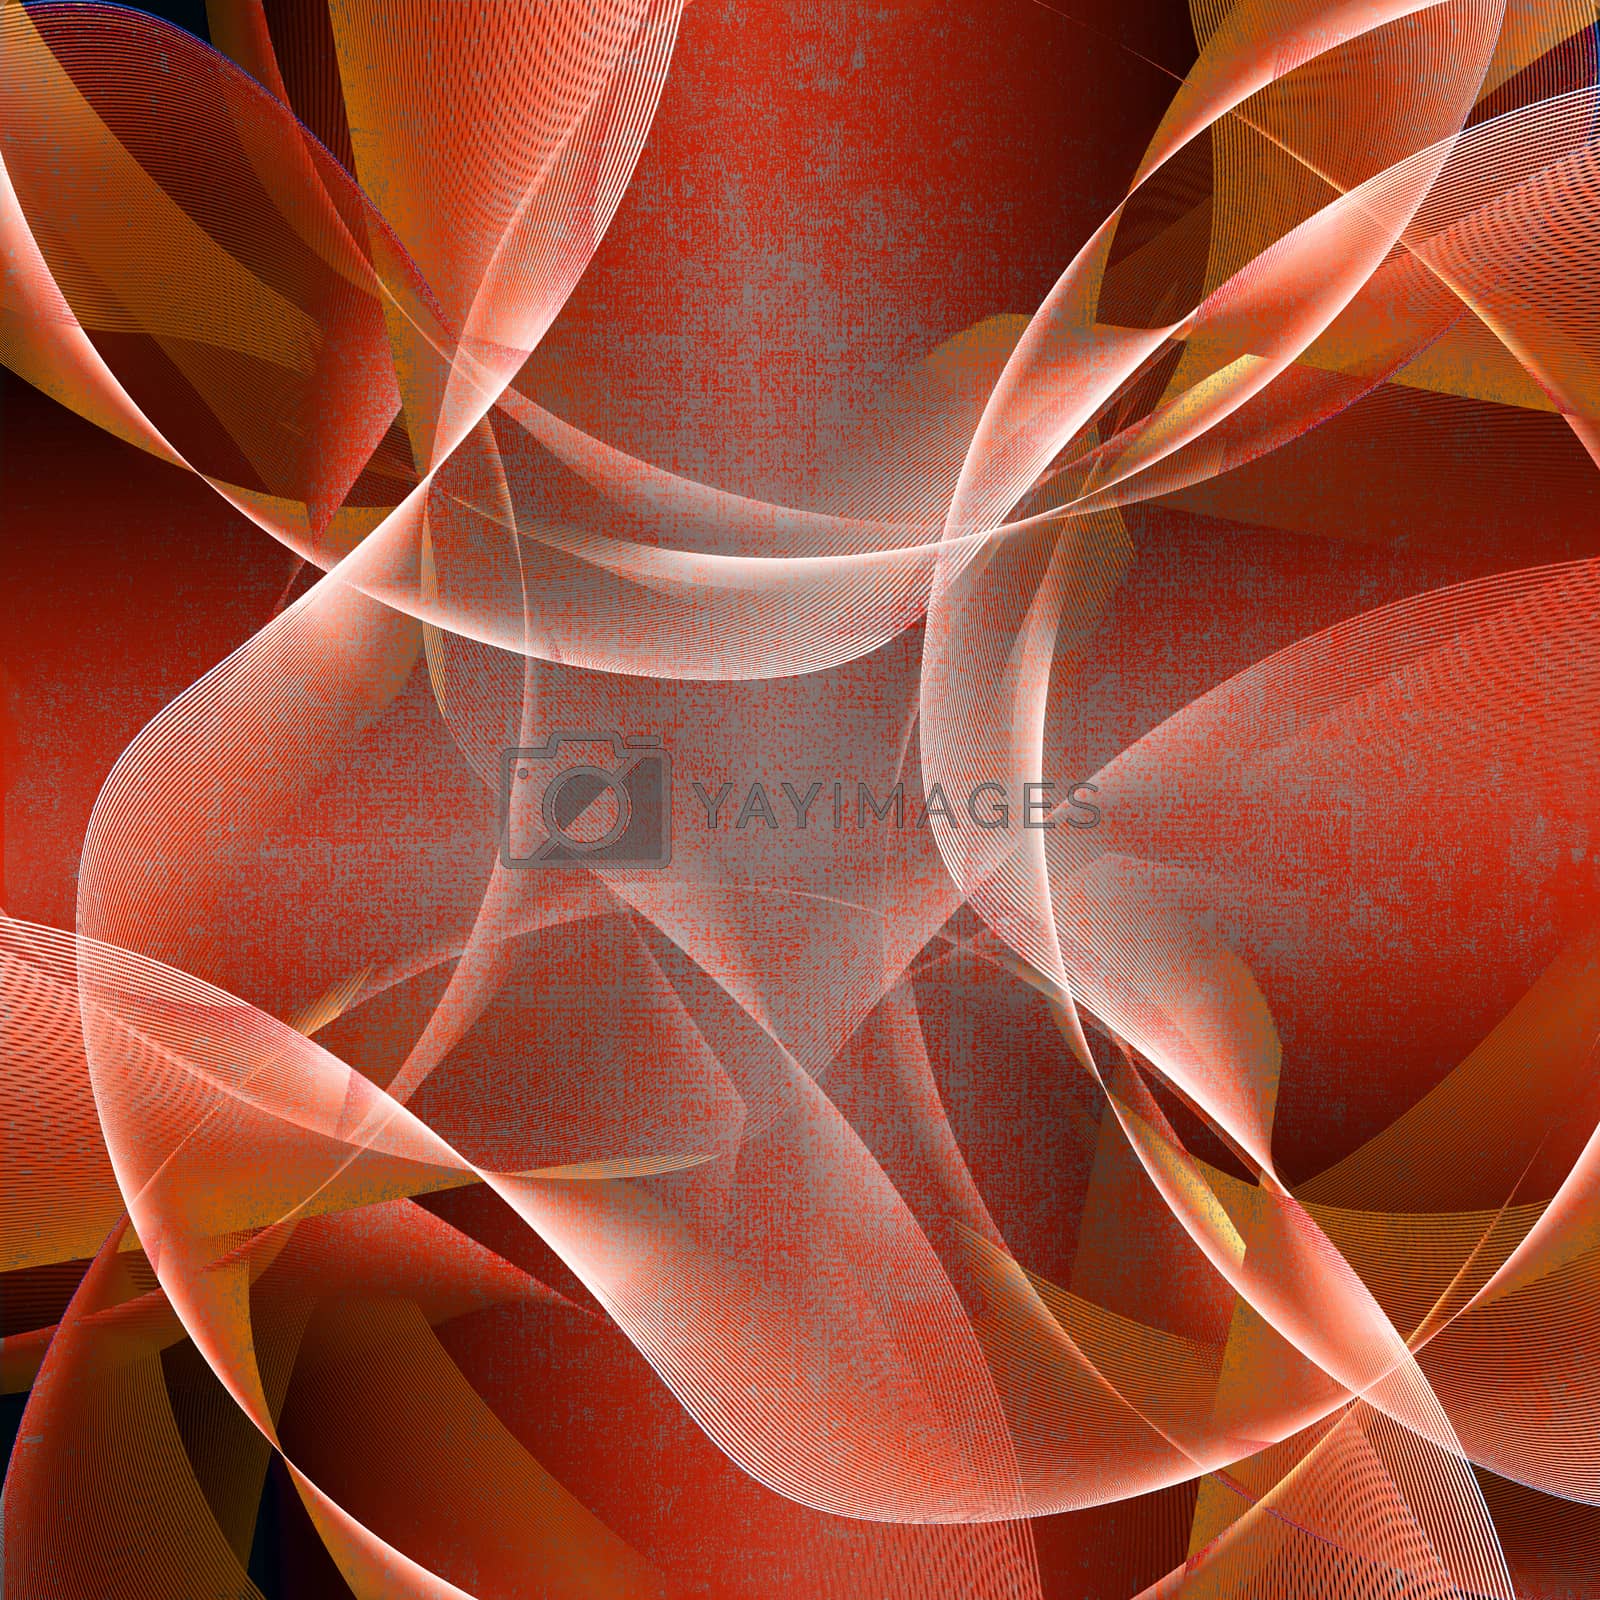 Royalty free image of abstract background by sommai